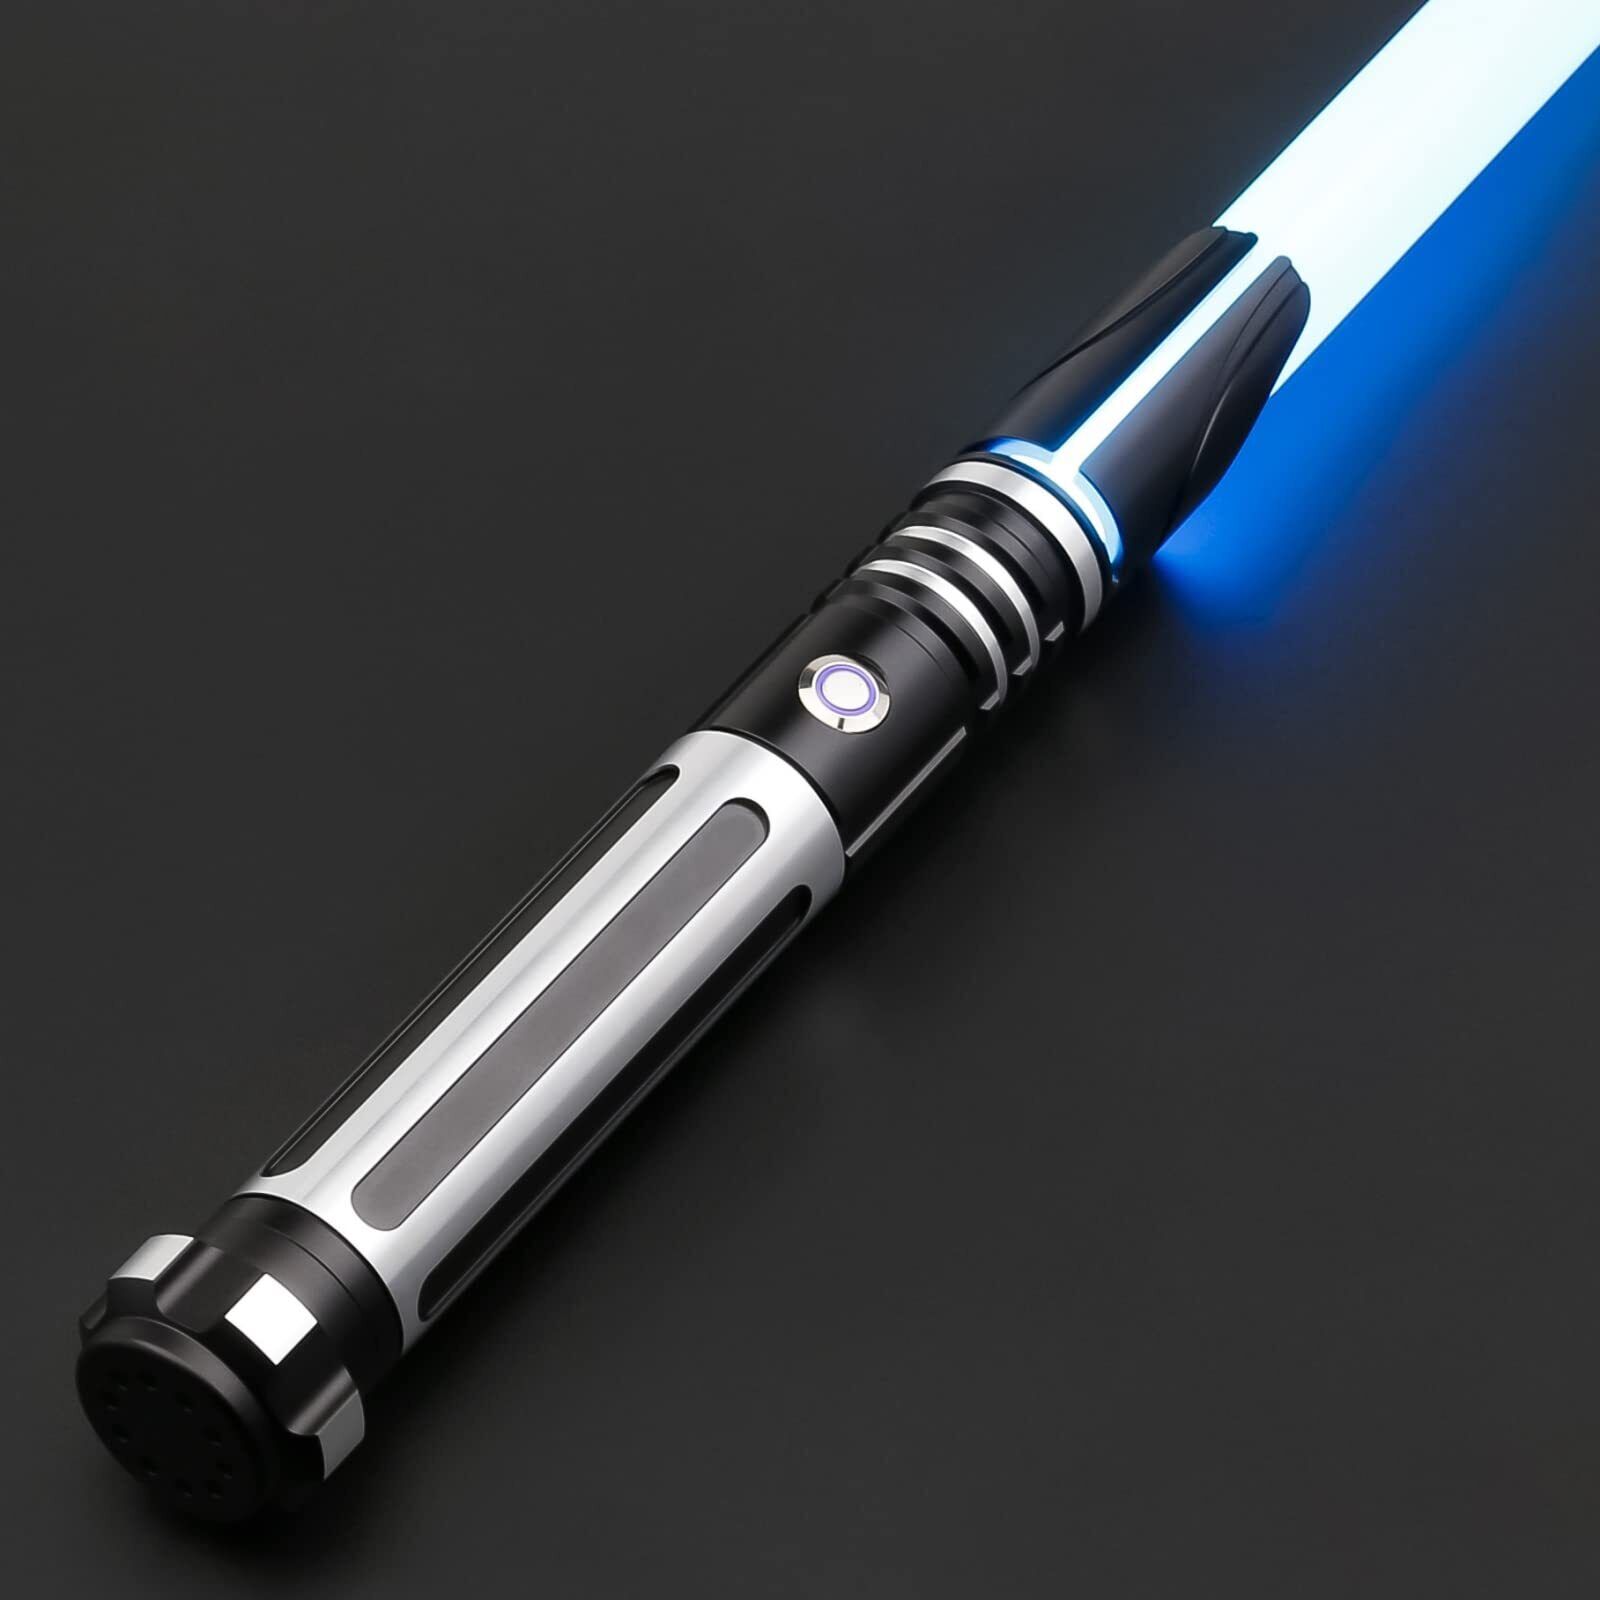 ANASABER Dueling Light Saber, Motion Control Lightsabers for Adults,Smooth Sw...